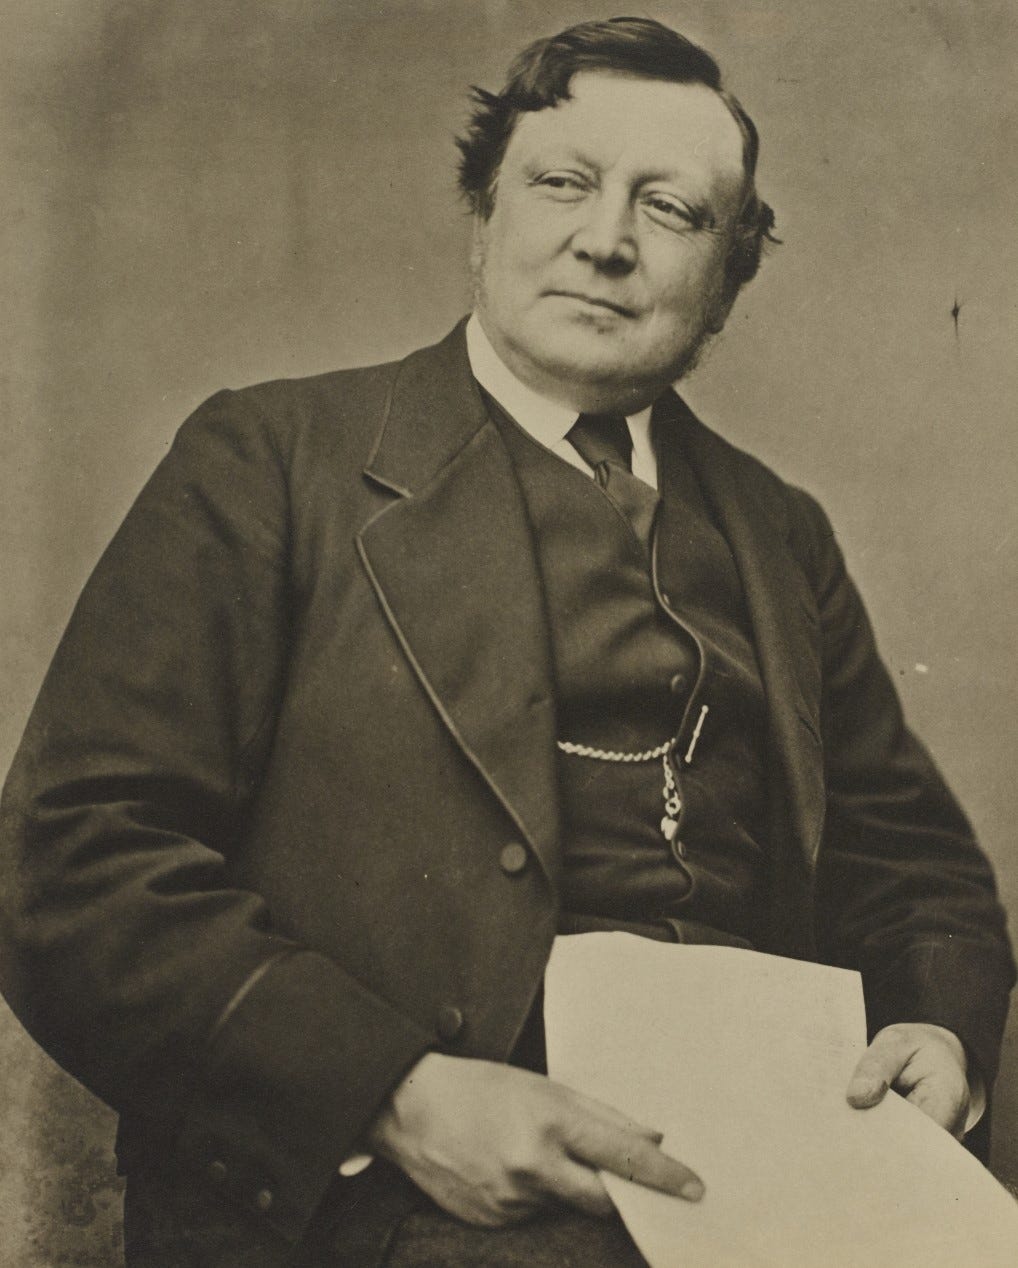 Sepia portrait photograph of Henry Roscoe, seated holding a piece of paper.